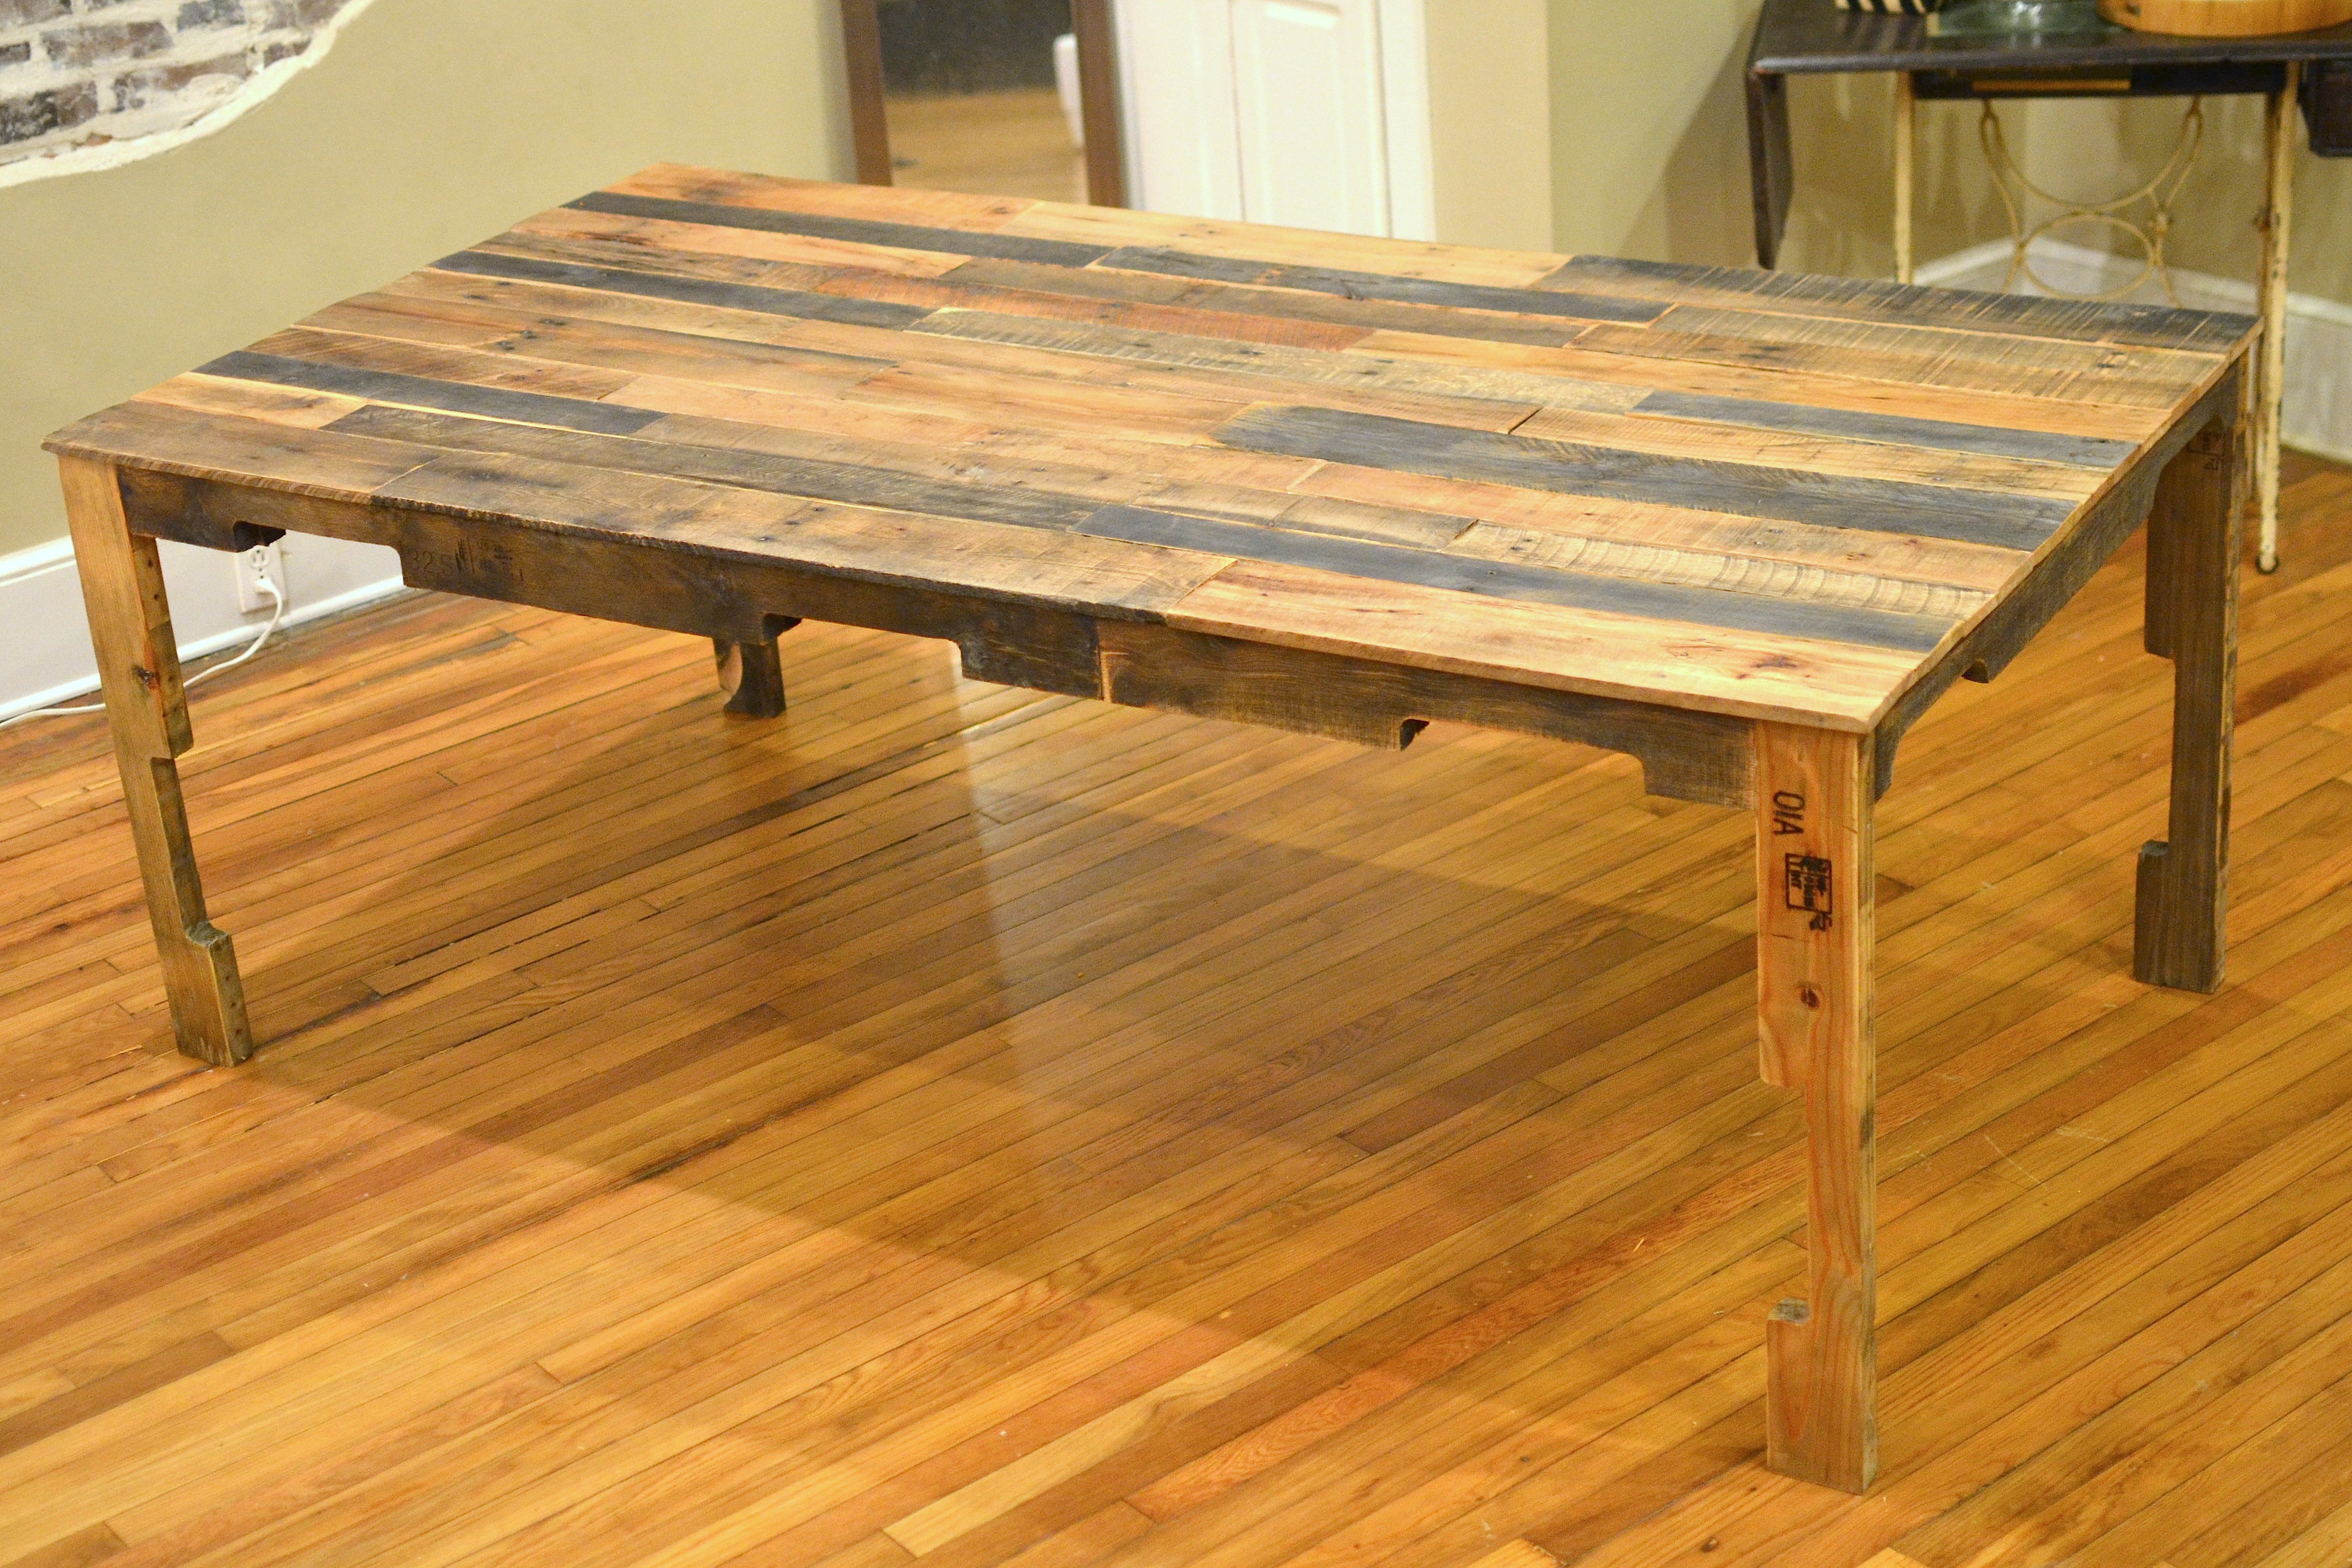 Dining Room Table Made Out Of Pallets